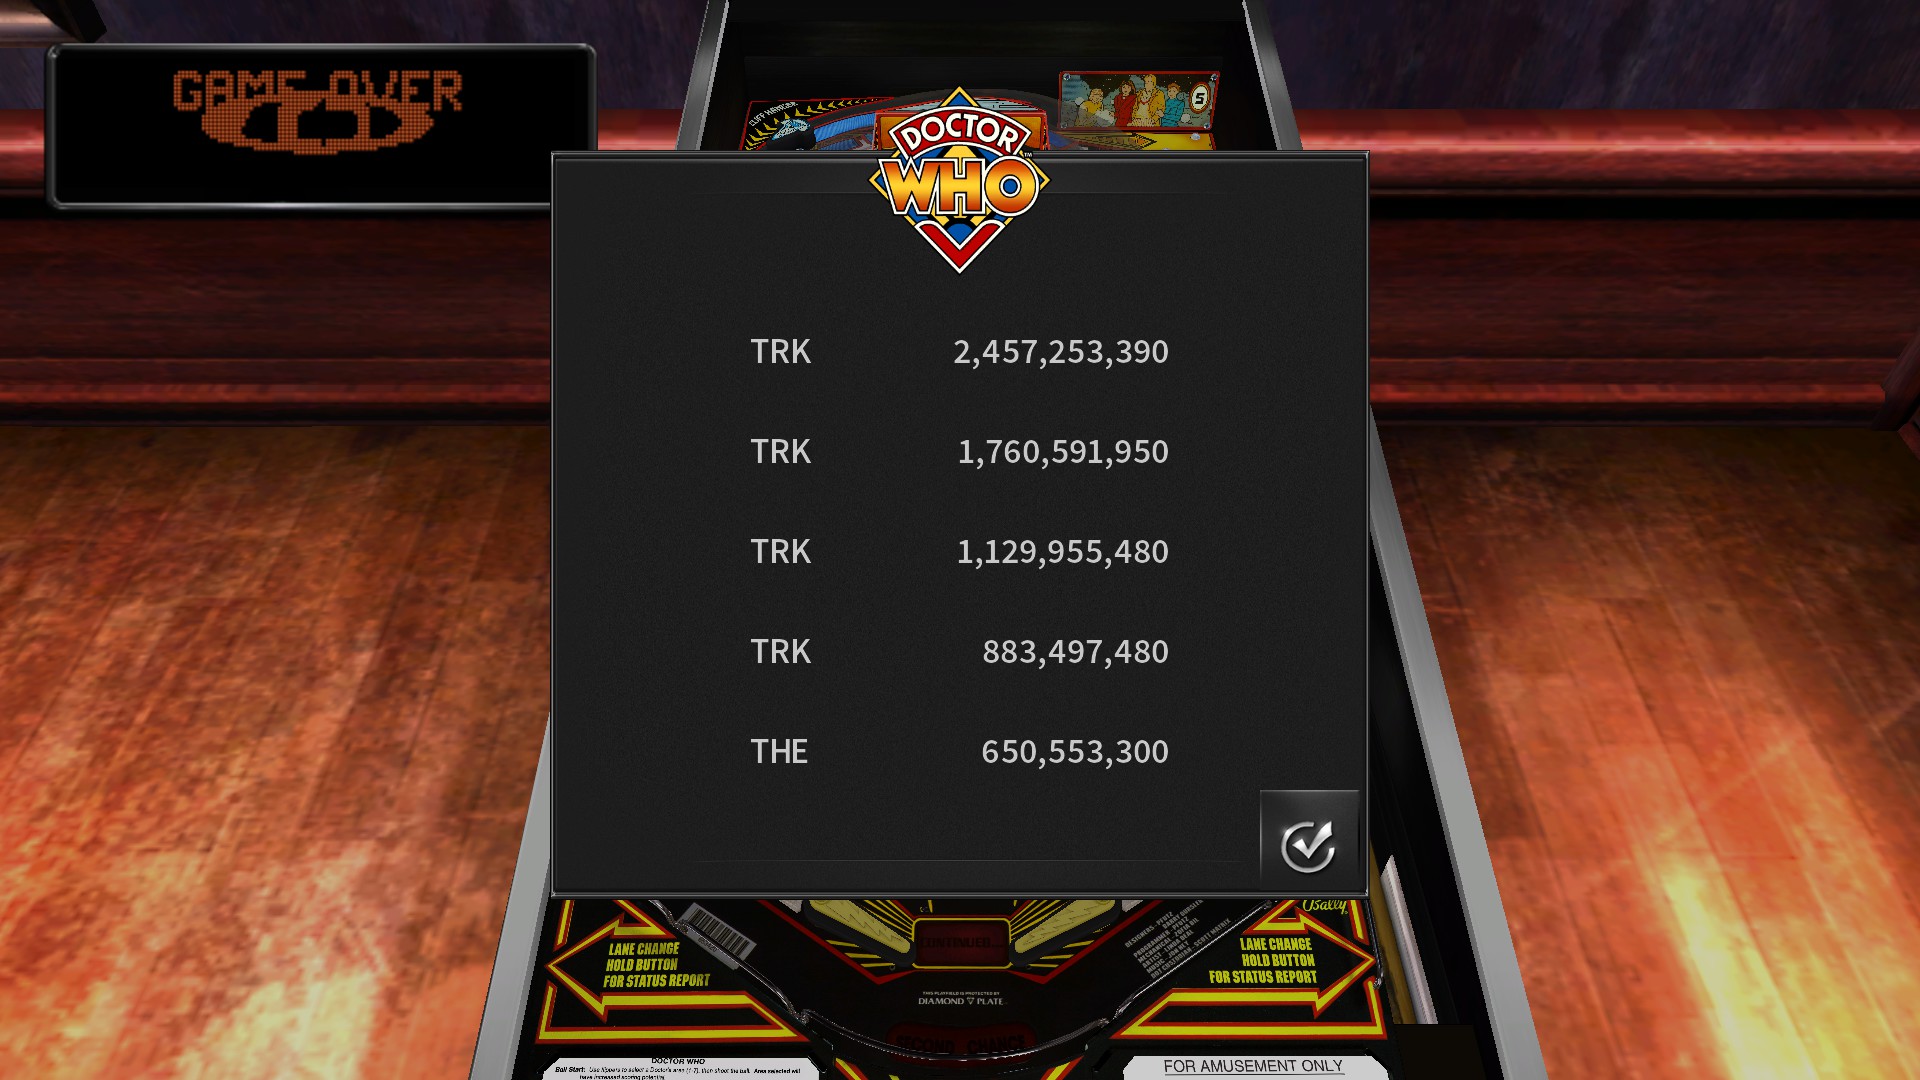 TheTrickster: Pinball Arcade: Doctor Who (PC) 2,457,253,390 points on 2016-11-21 05:25:23